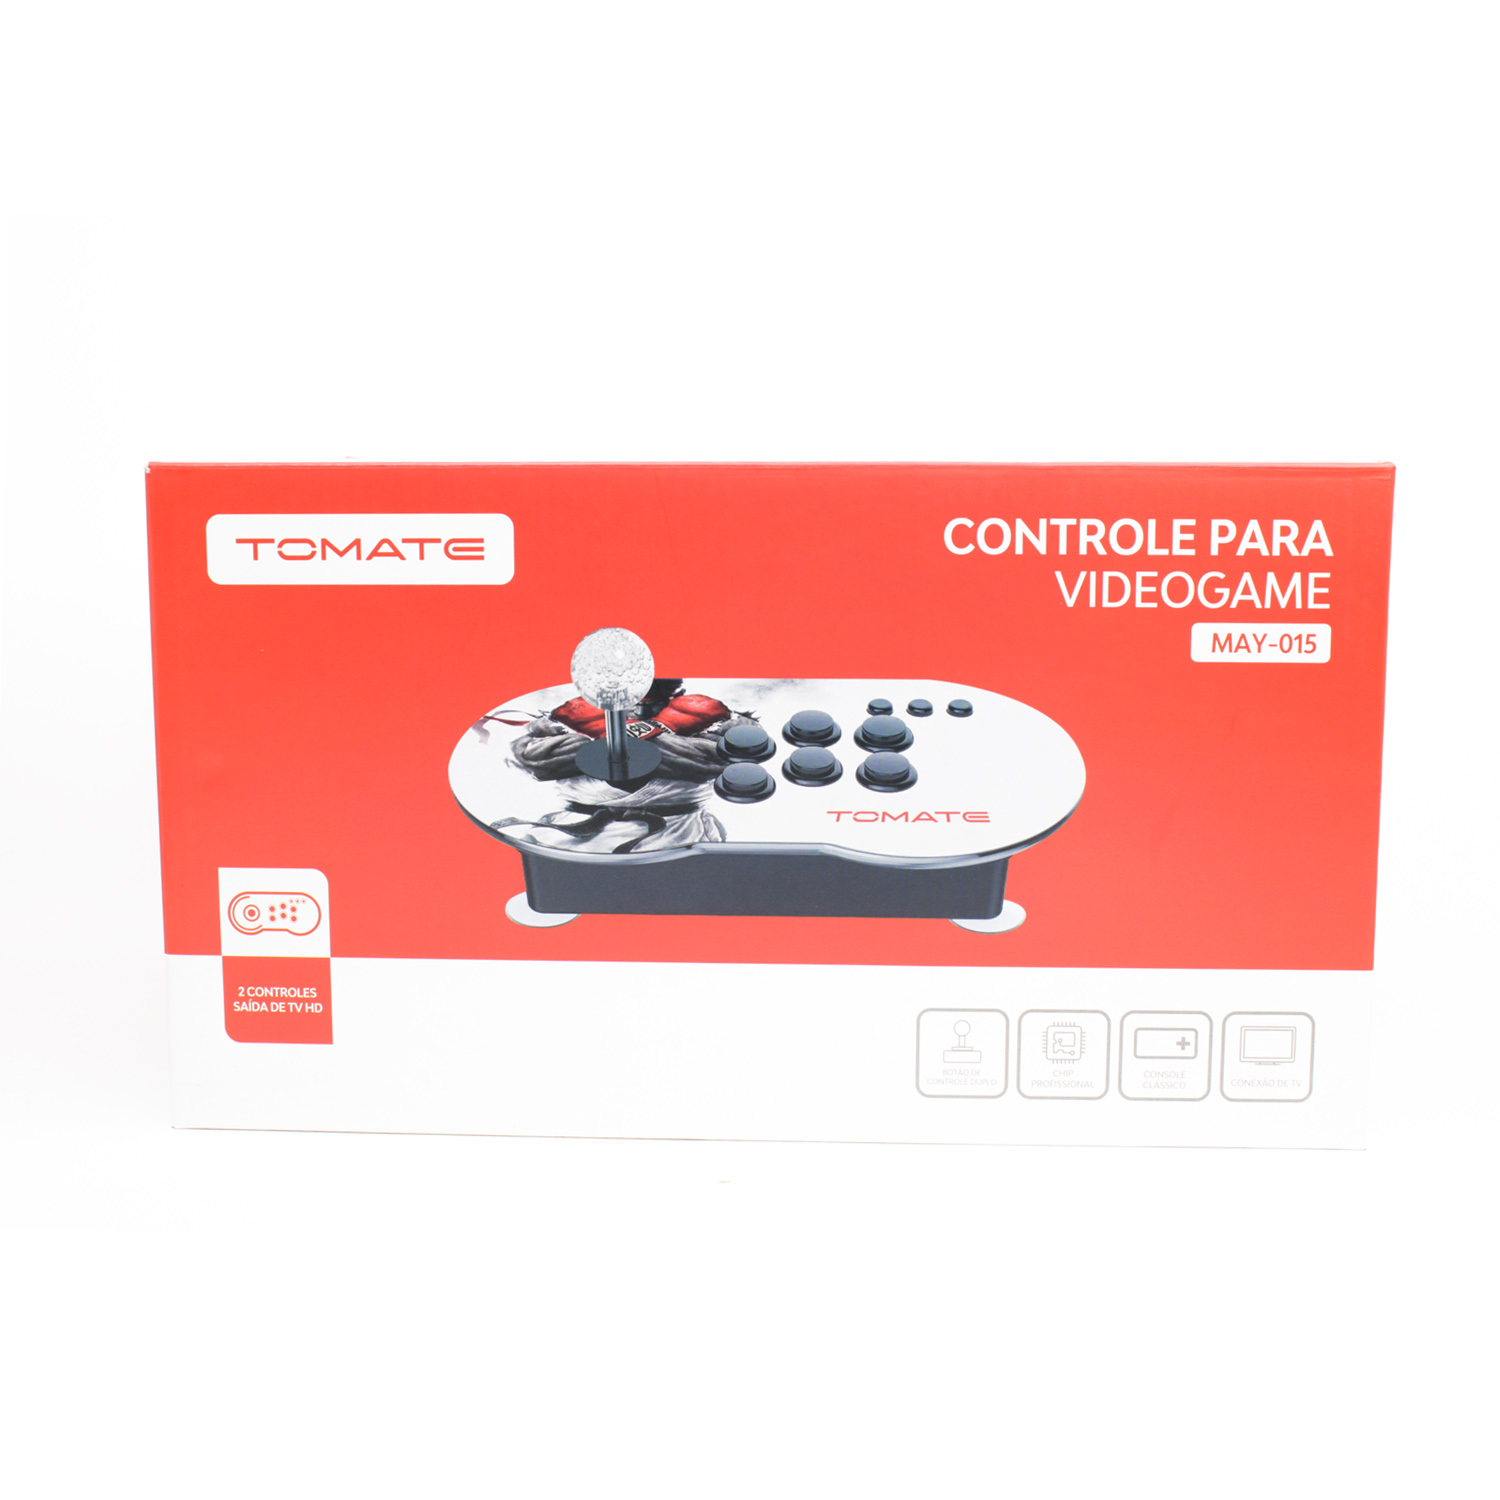 Video Game HDMI 2 Controles - Tomate MAY-015